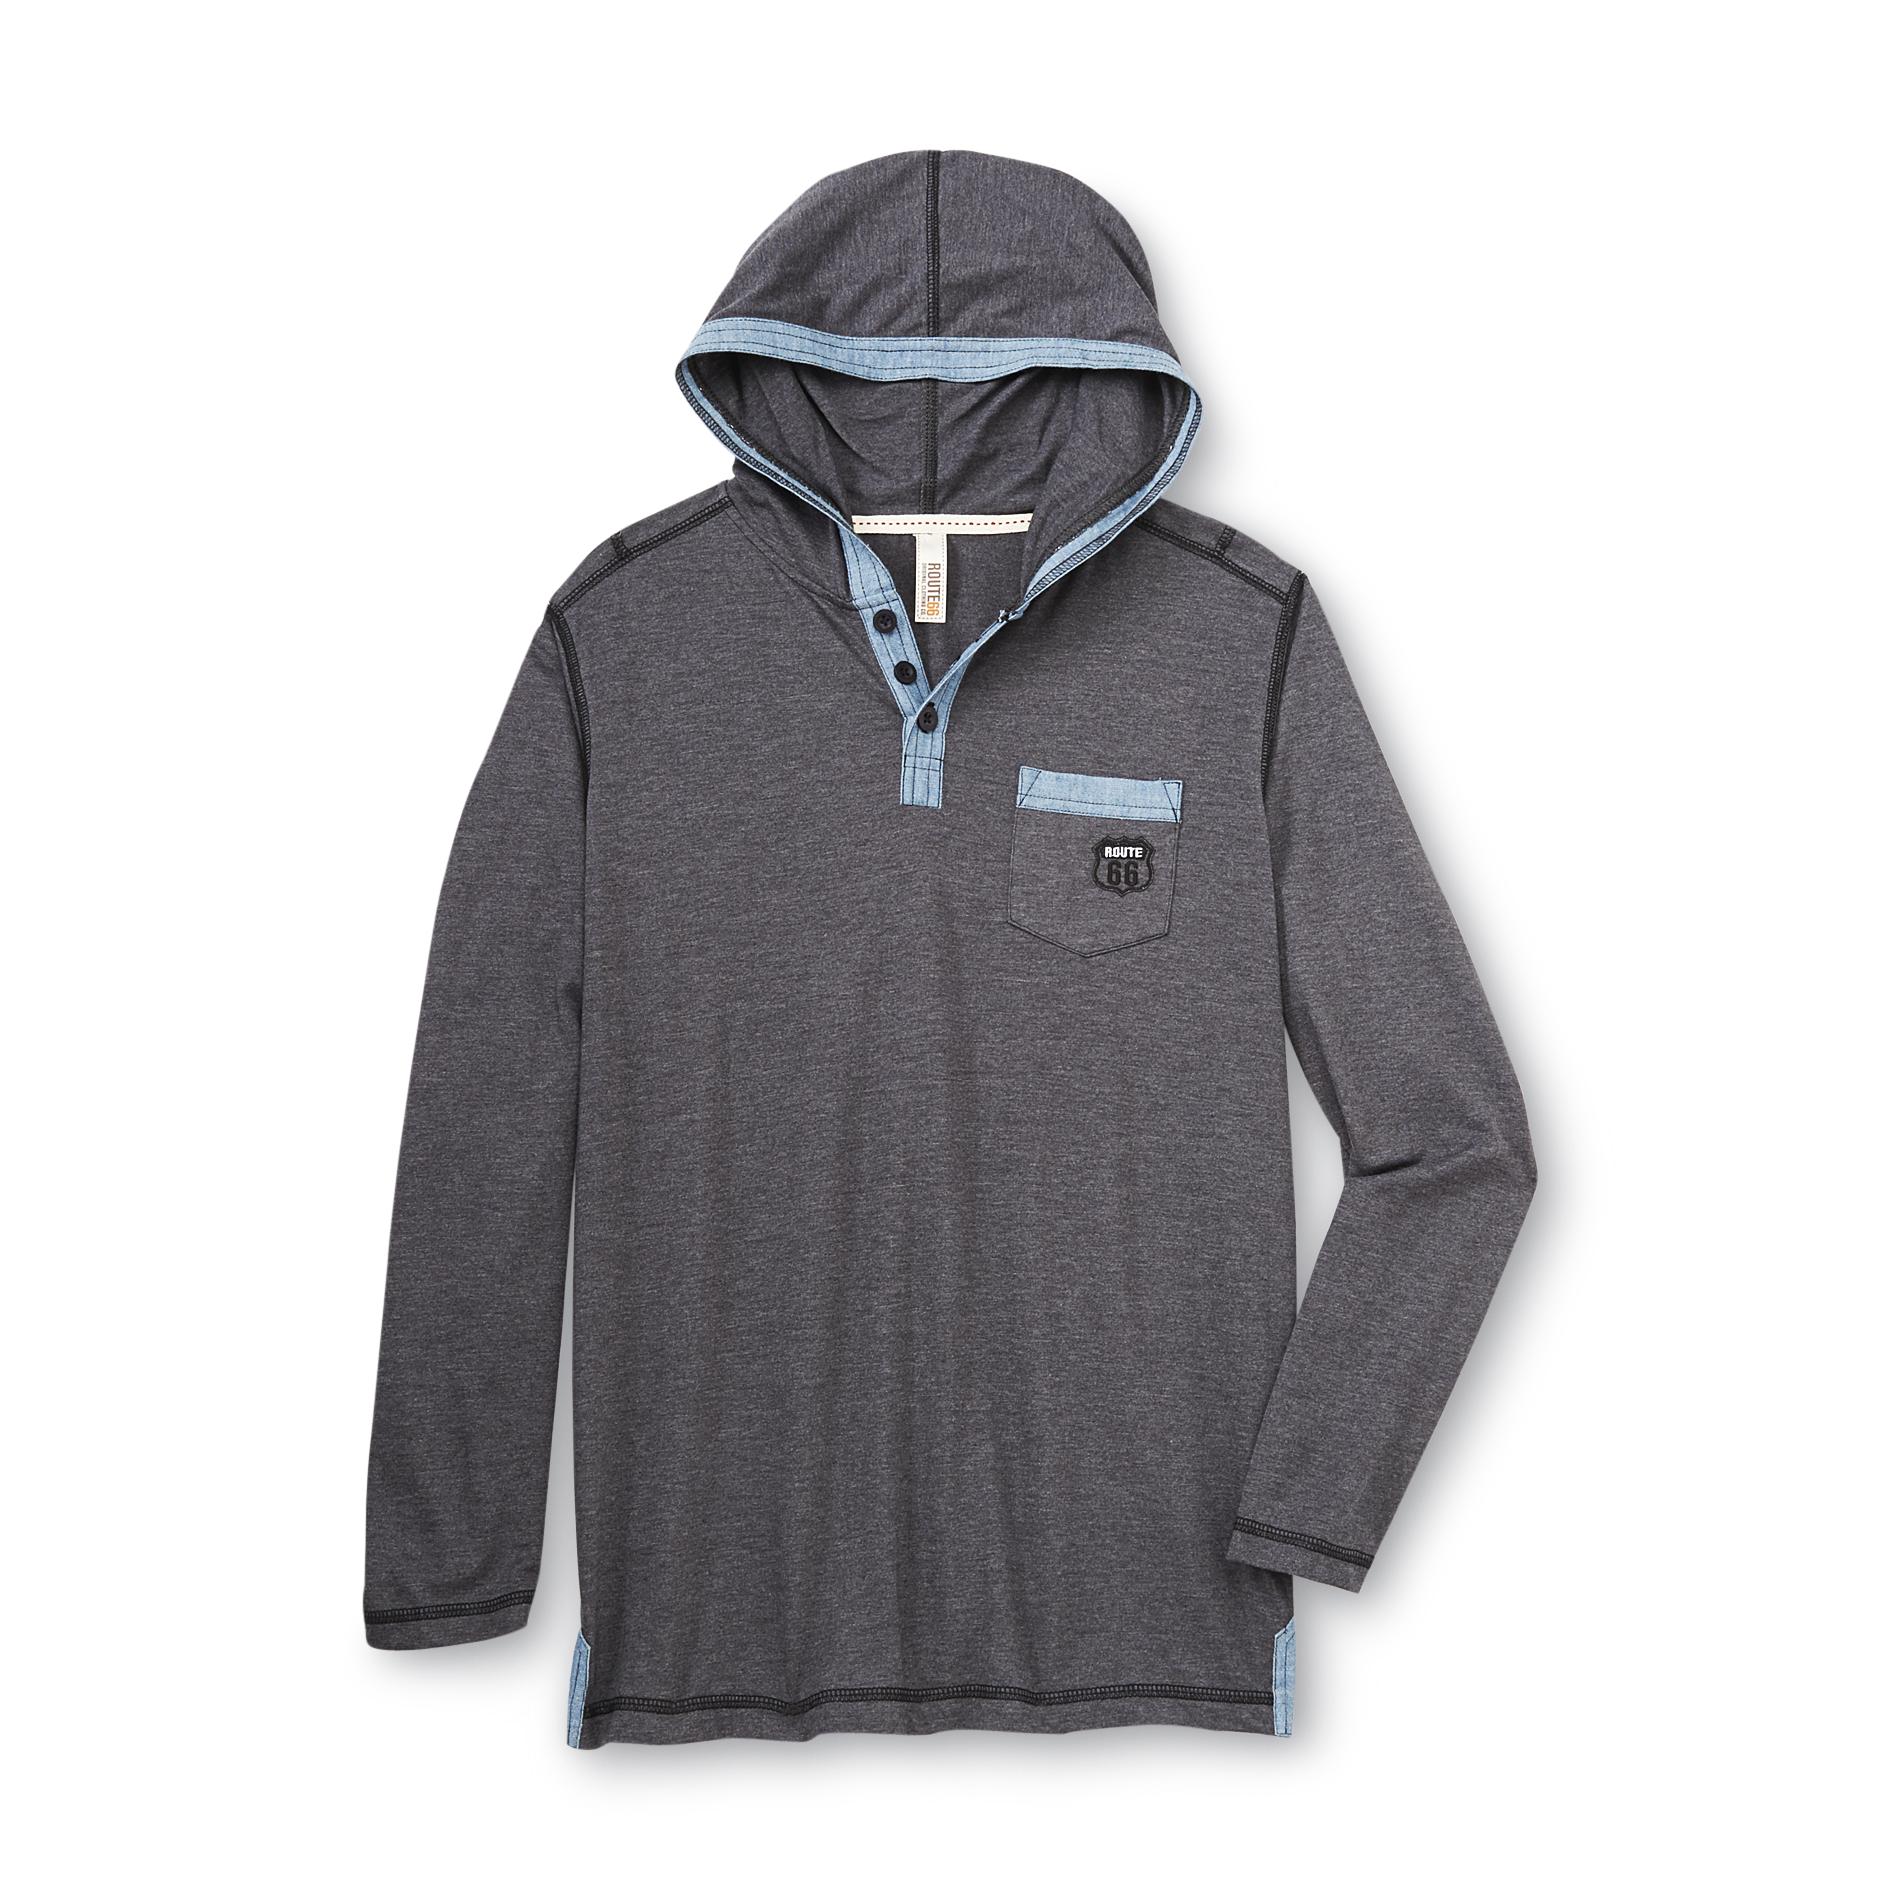 Route 66 Boy's Lightweight Hoodie - Chambray Trim